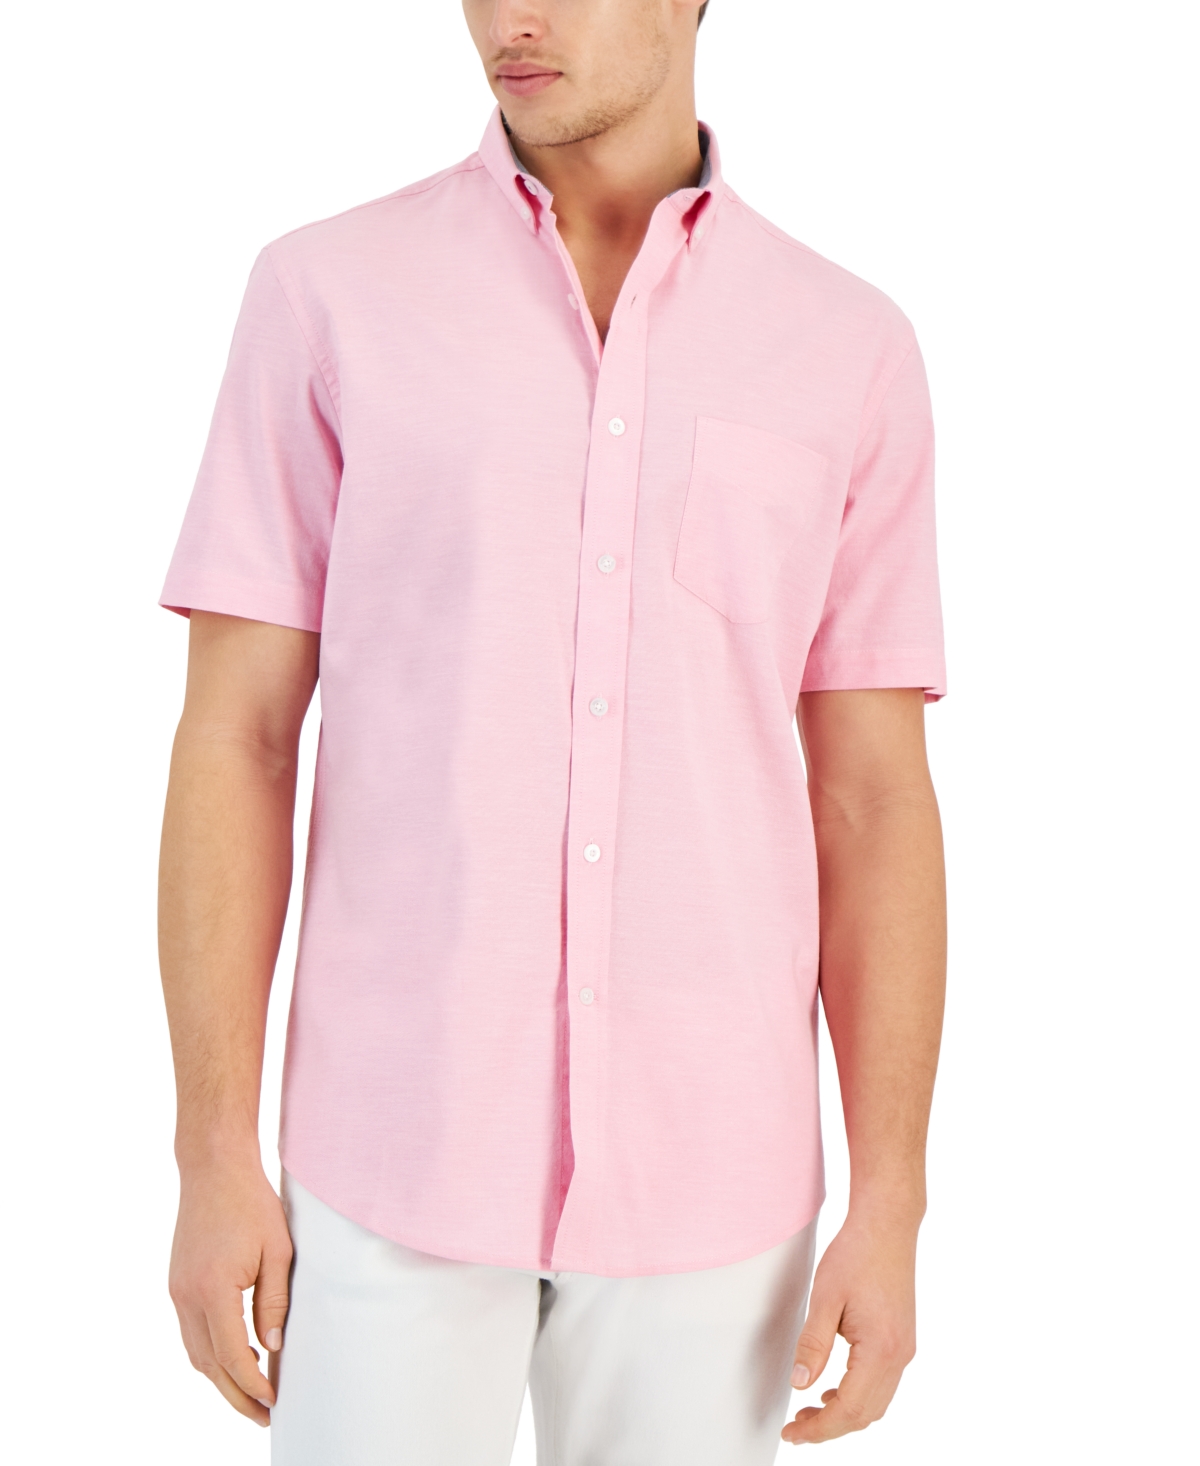 Men's Short Sleeve Button-Down Oxford Shirt, Created for Macy's - Pink Sky Combo